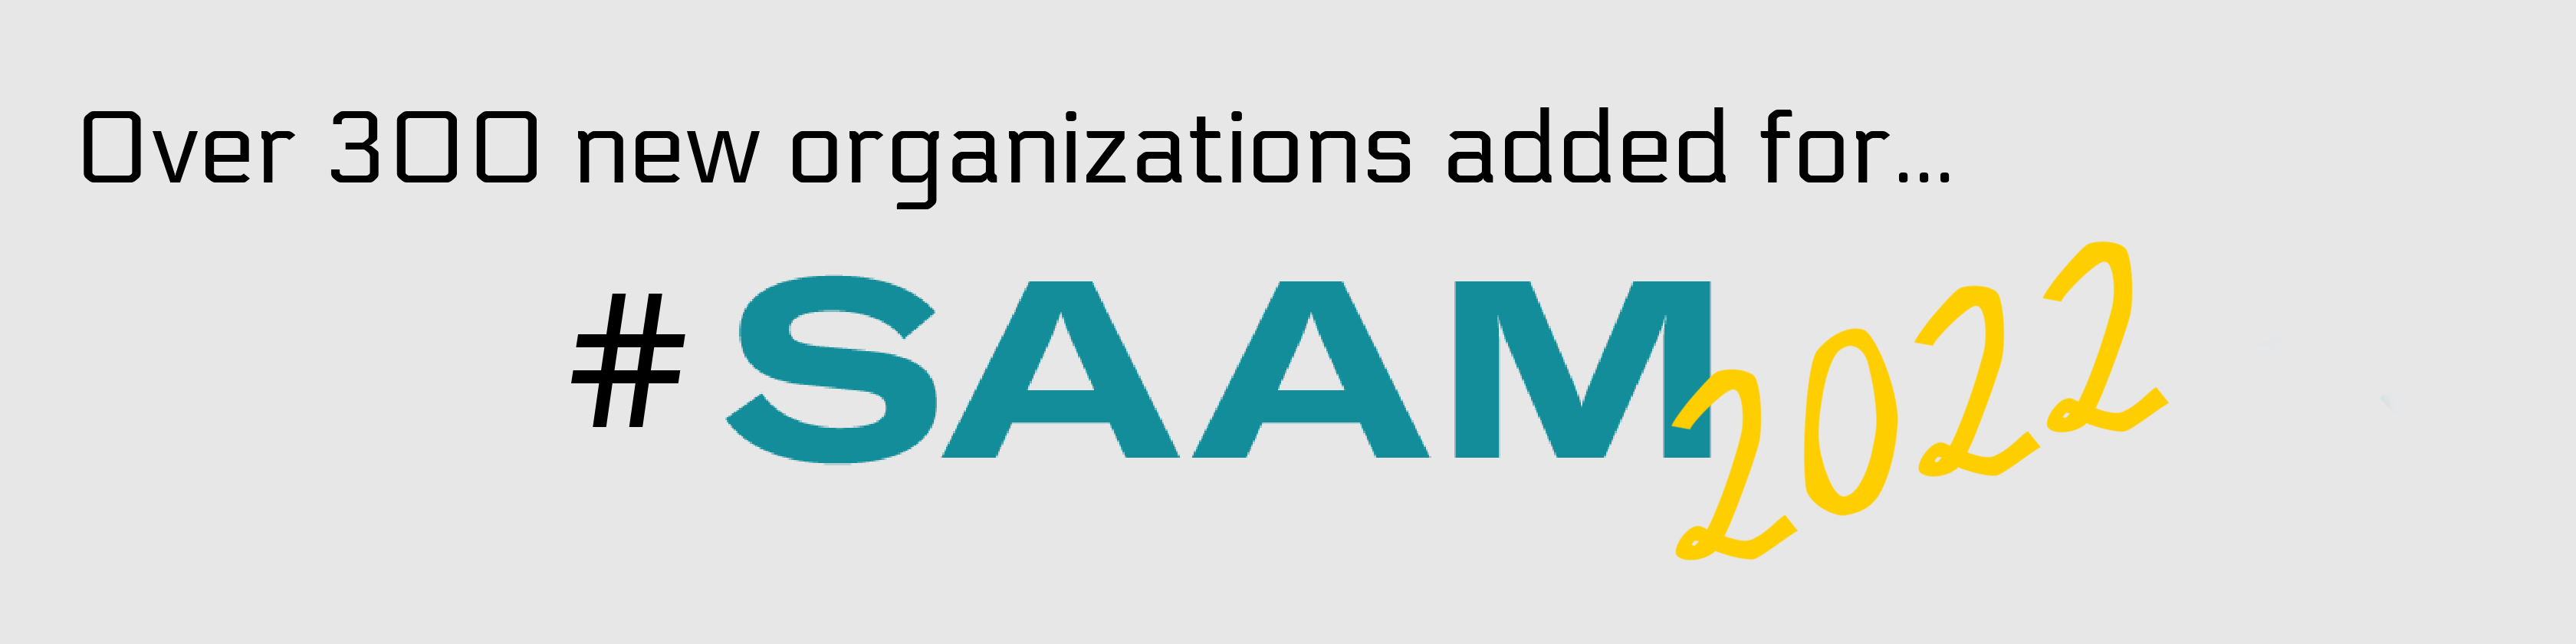 Grey banner that reads "Over 300 new organizations added for #saam 2022"